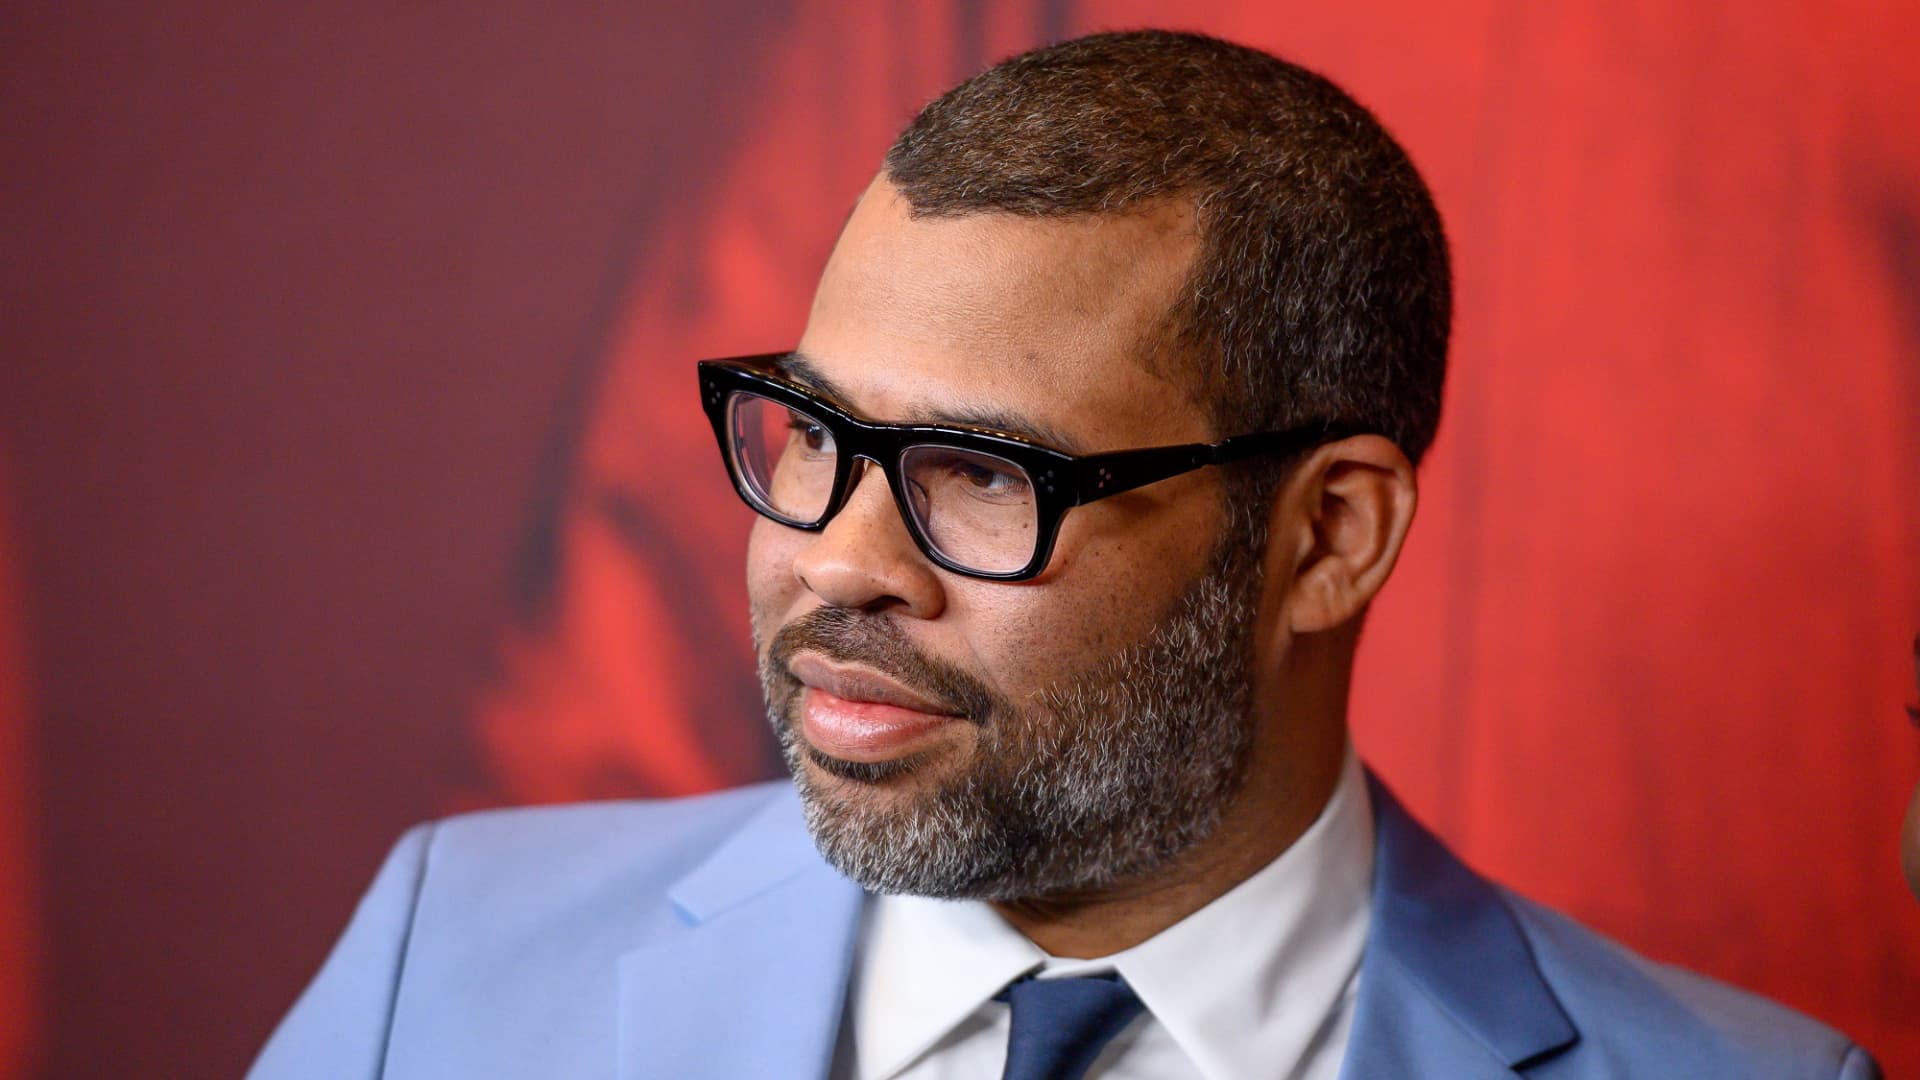 Writer/Director Jordan Peele attends the 'Us' New York Premiere at Museum of Modern Art on March 19, 2019 in New York City.